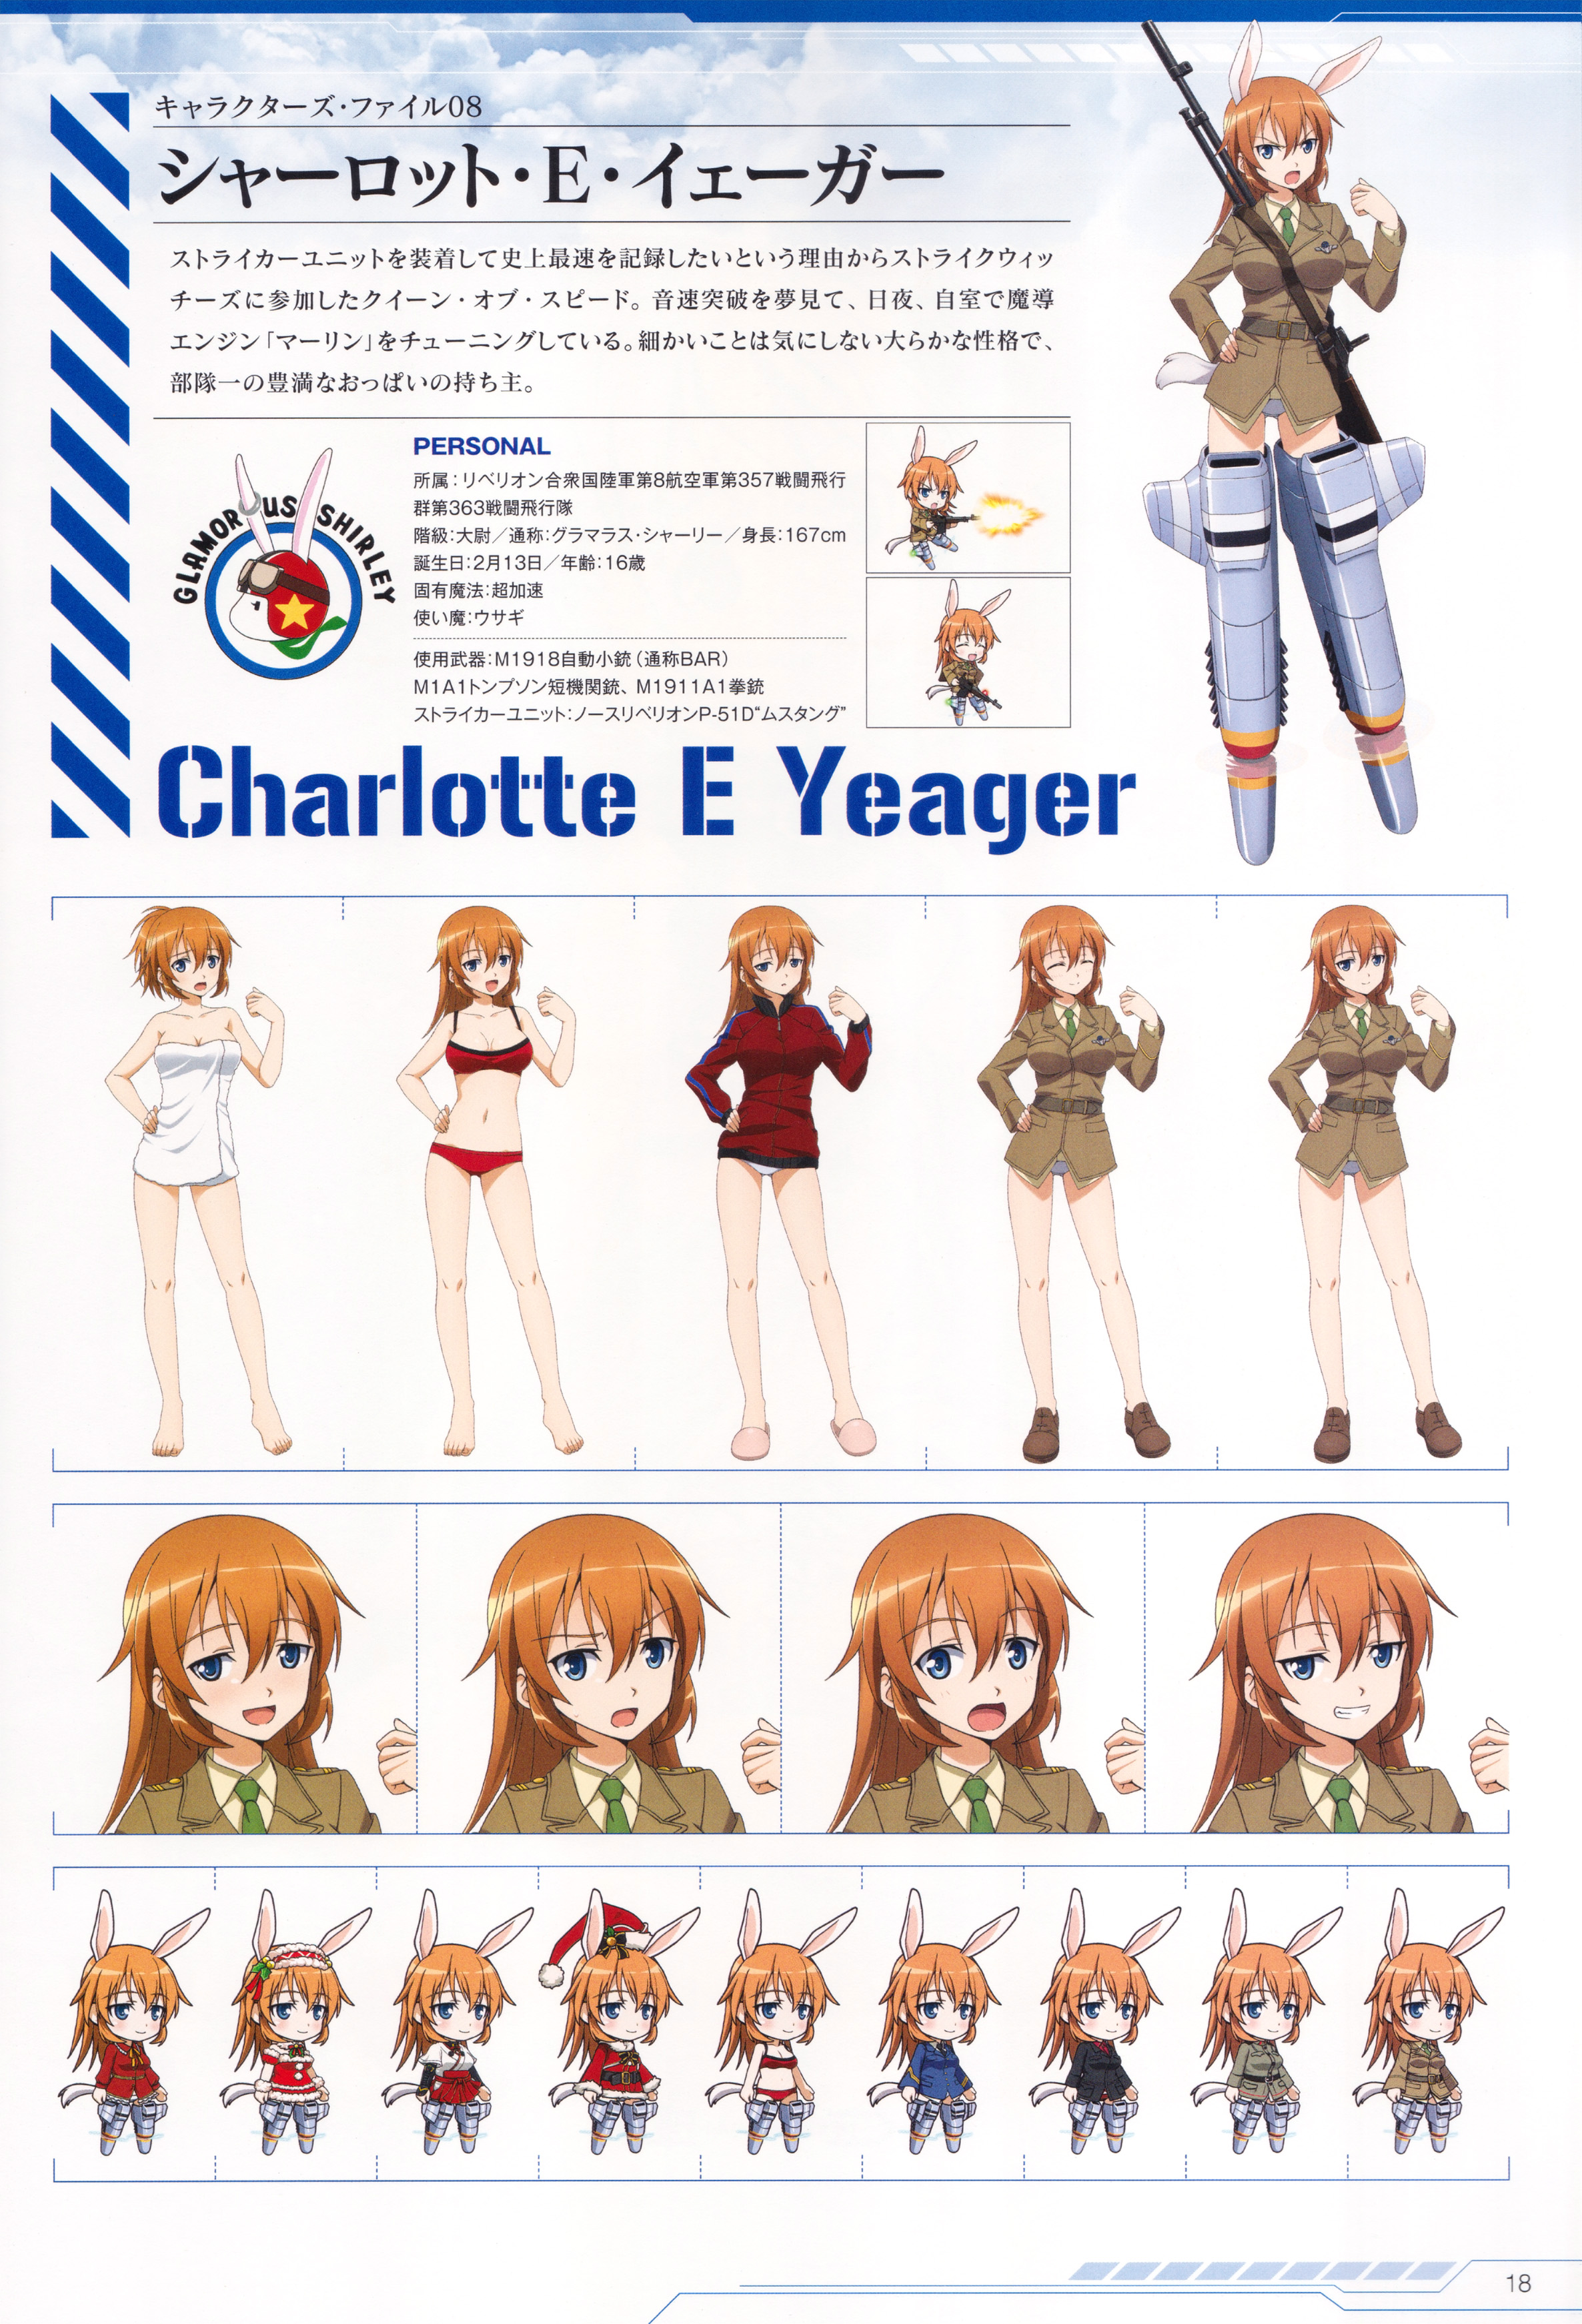 Strike Witches Charlotte E Yeager Animal Ears Bathing Bunny Ears Character Design Chibi Christmas Expression Gun Profile Page Swimsuits me Tail Uniform Yande Re